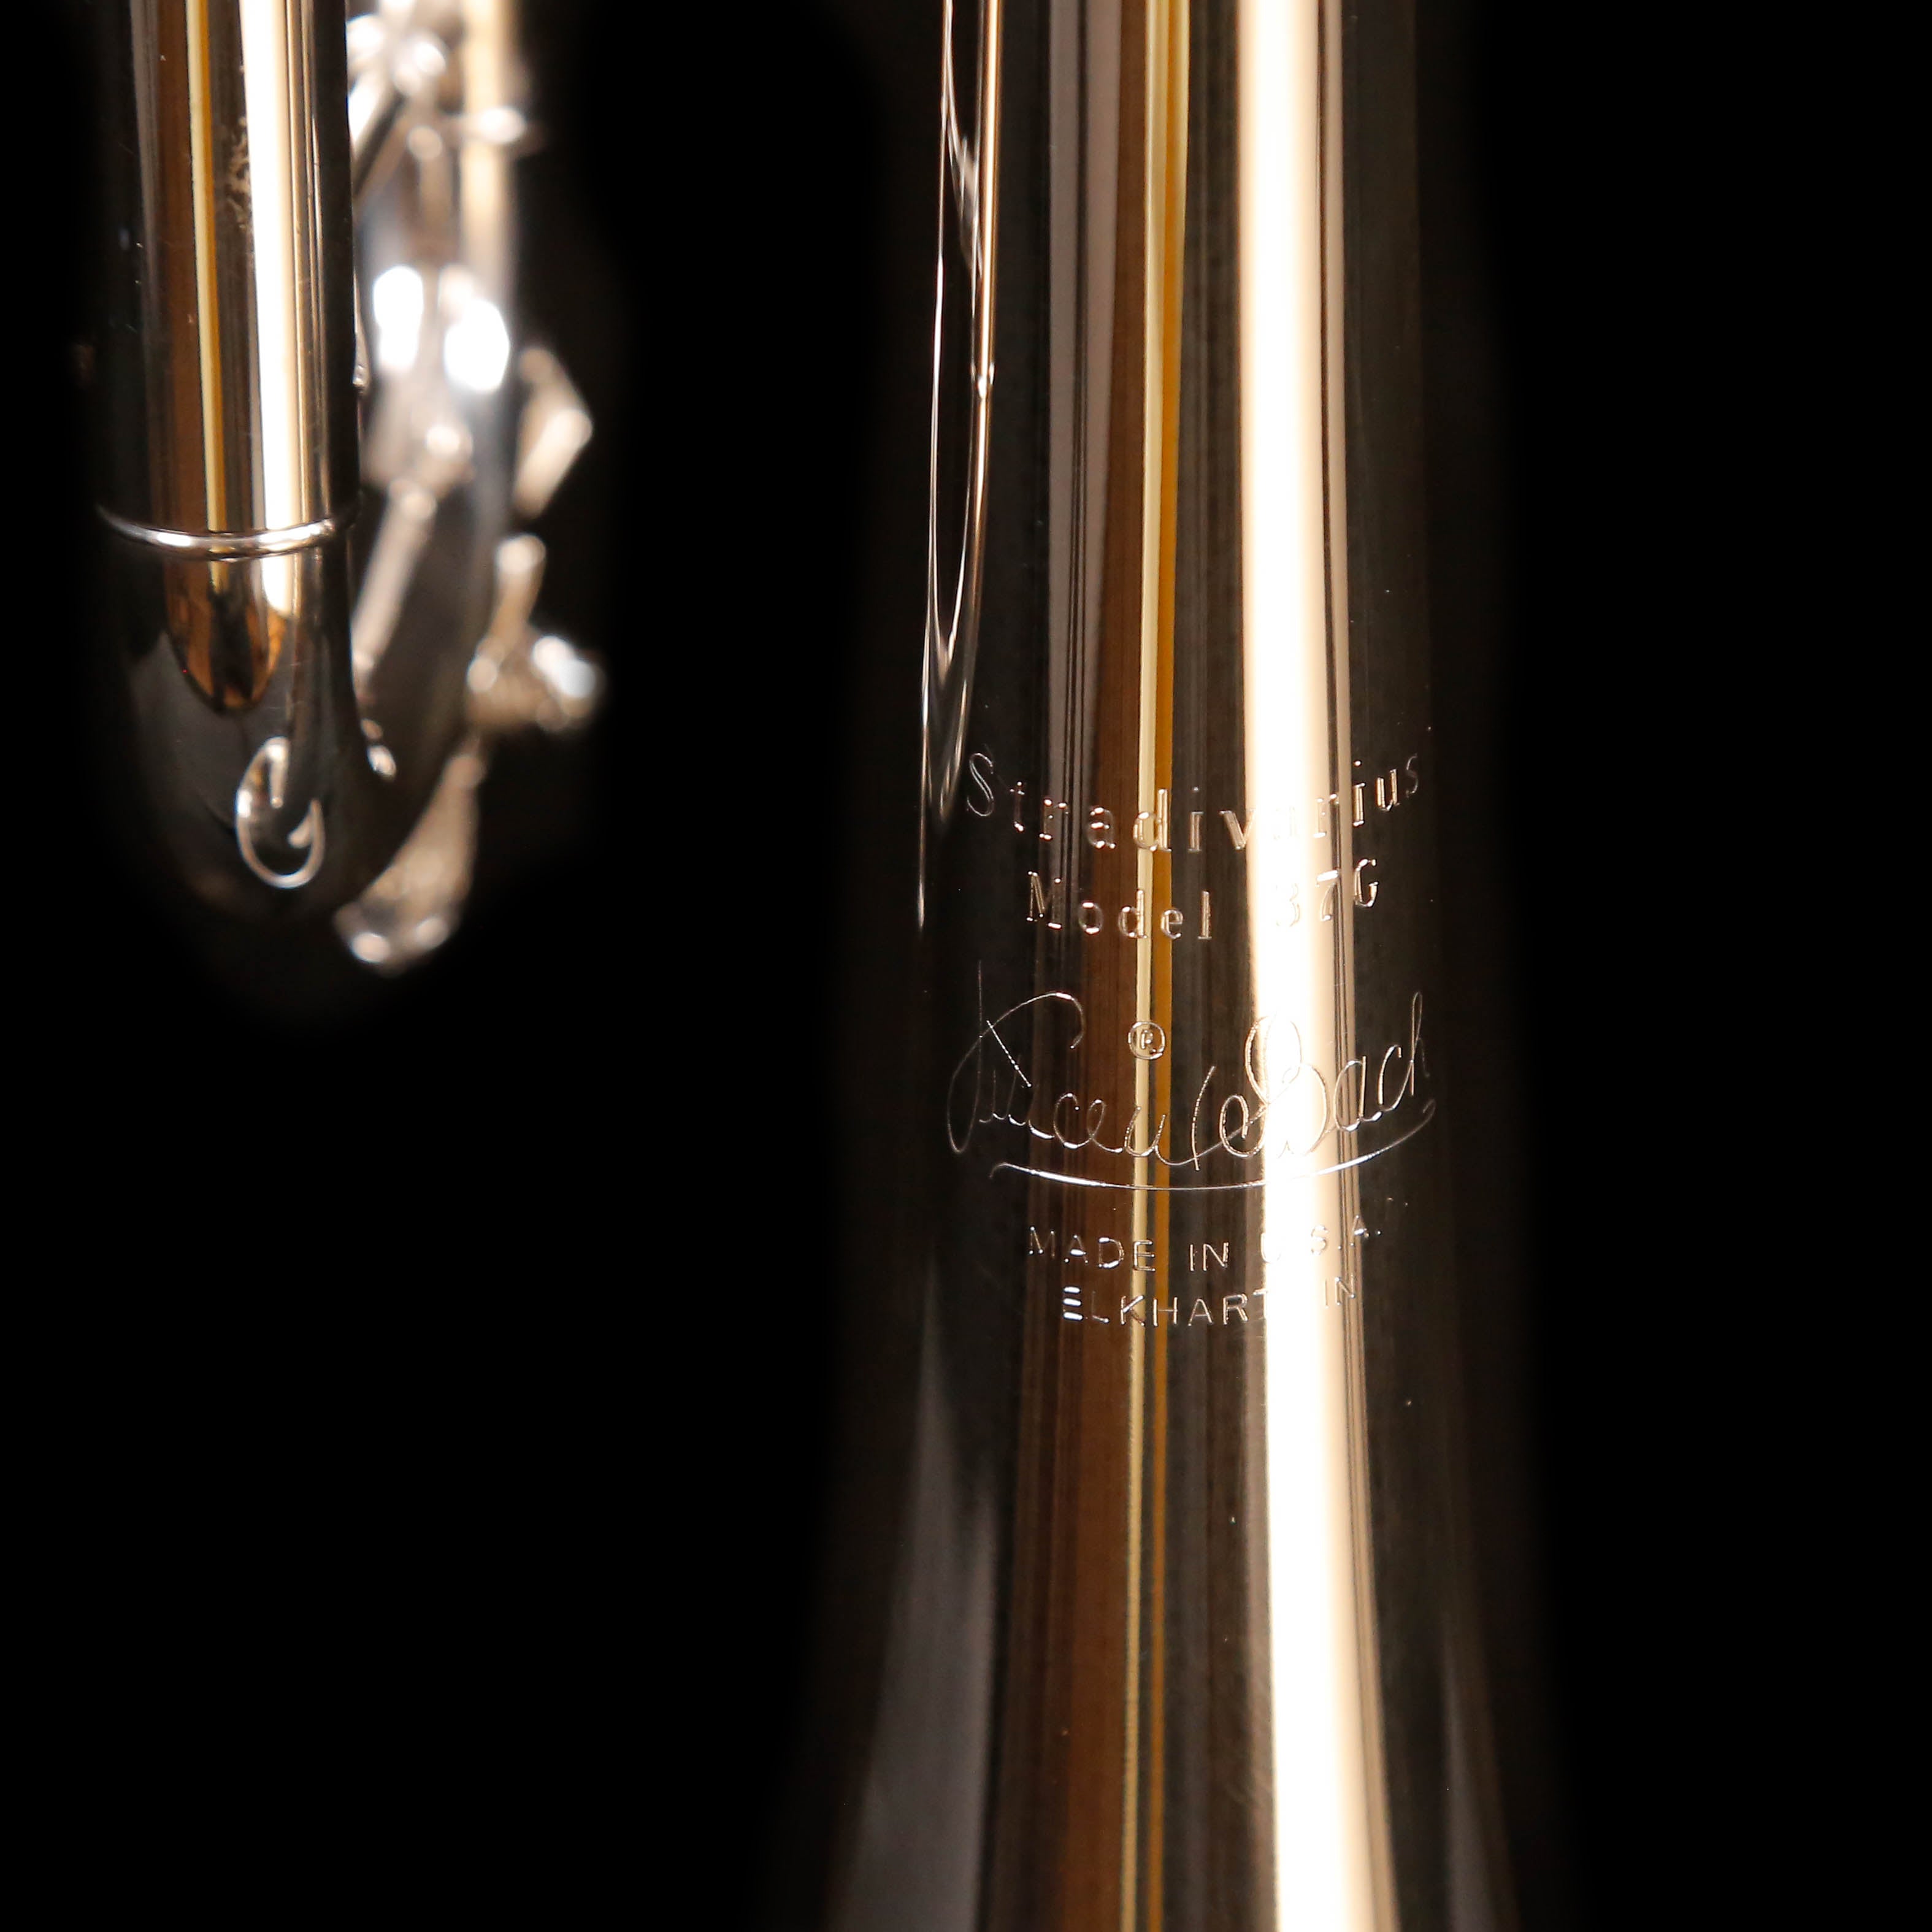 Bach LR180S37G Trumpet Outfit